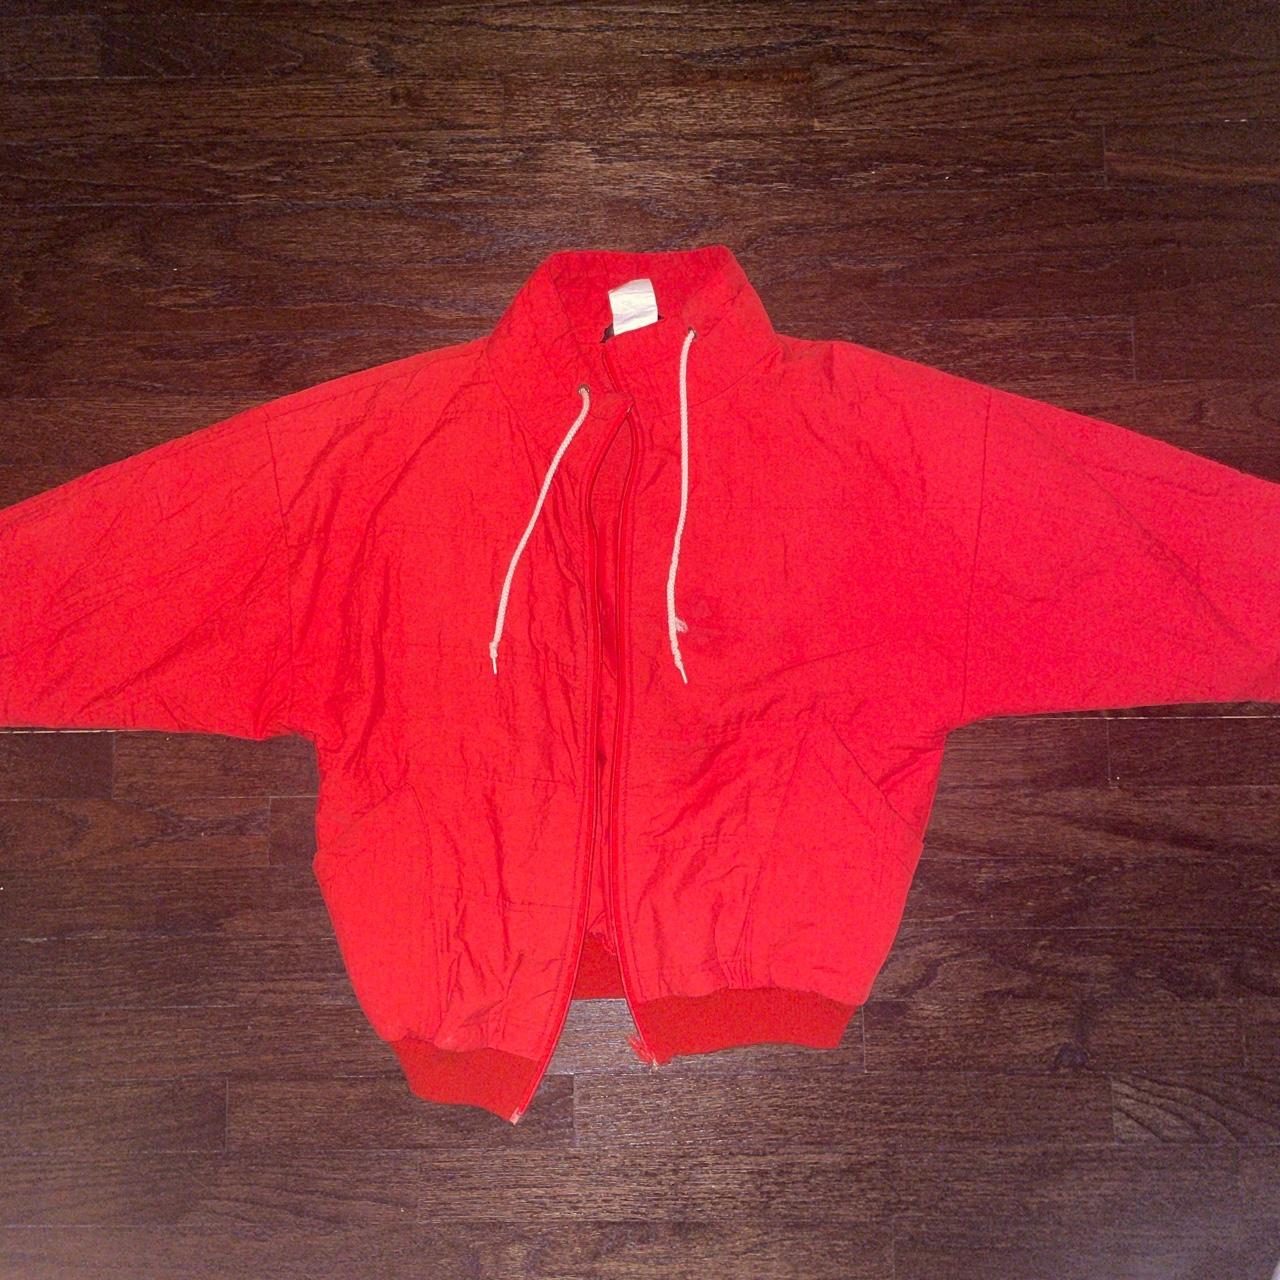 Product Image 2 - Red collared jacket
Semi-puffy, tapered sleeves